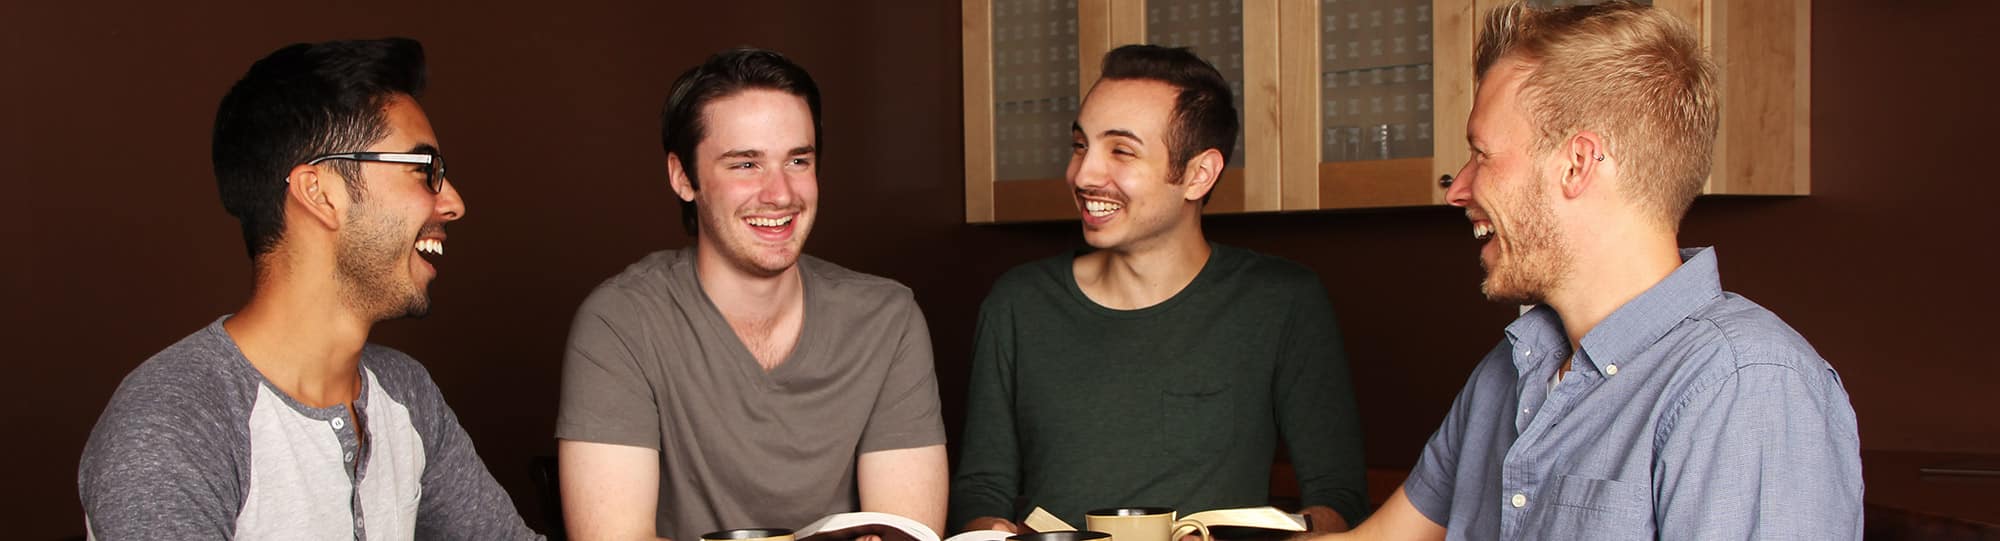 Four men in modern clothing, sitting at a table and smiling, laughing together